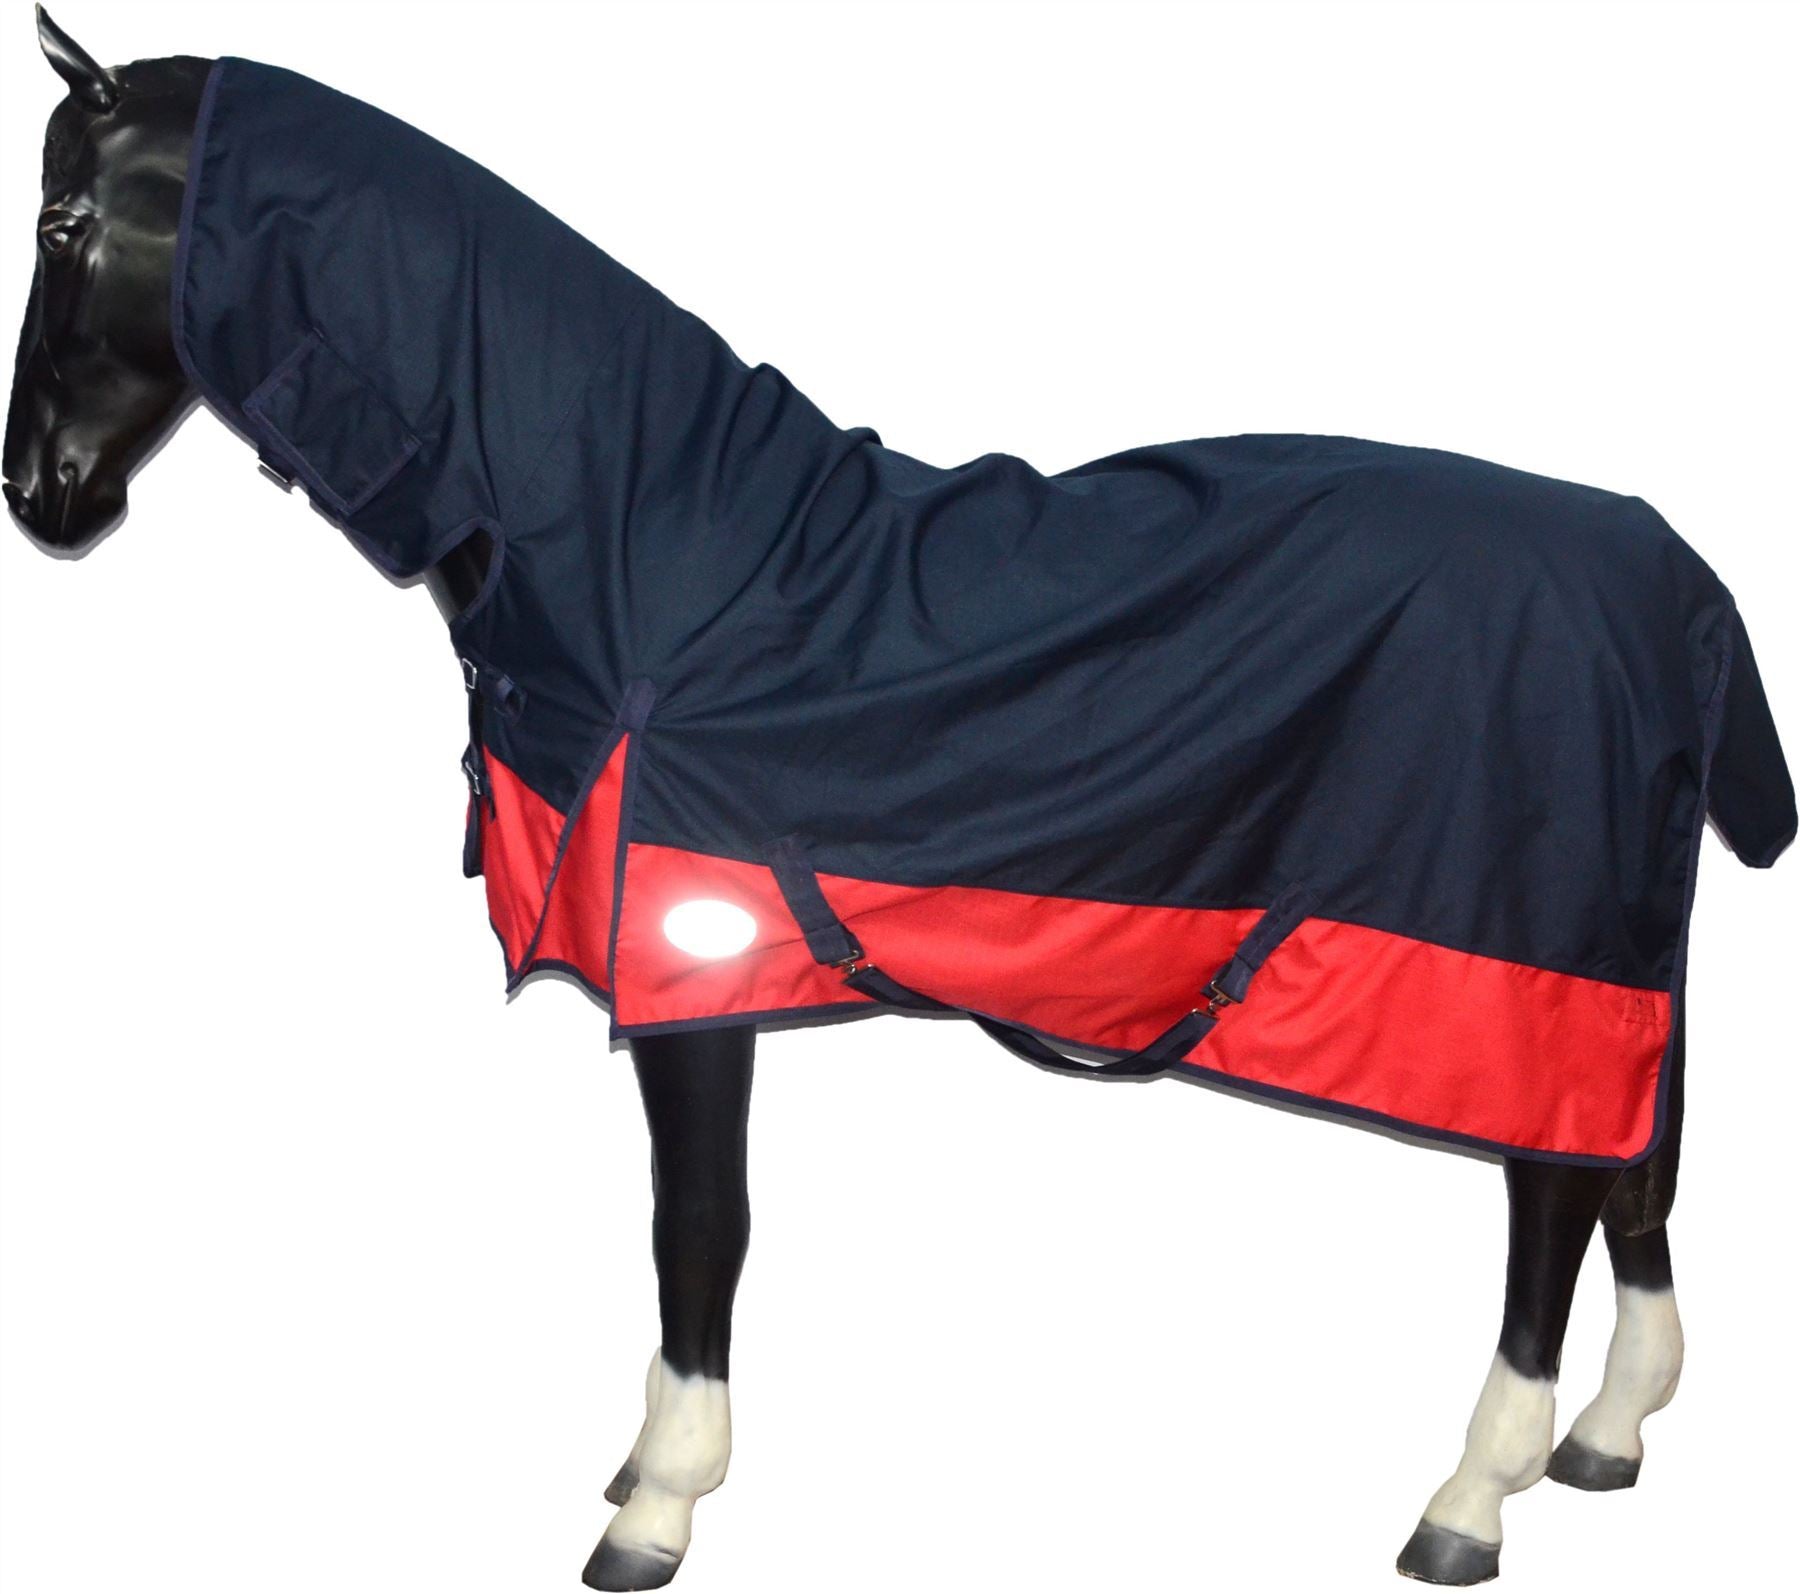 1200D Liteweight Turnout Horse Rug Waterproof Combo Full Neck Navy/Red 4'6-7'3